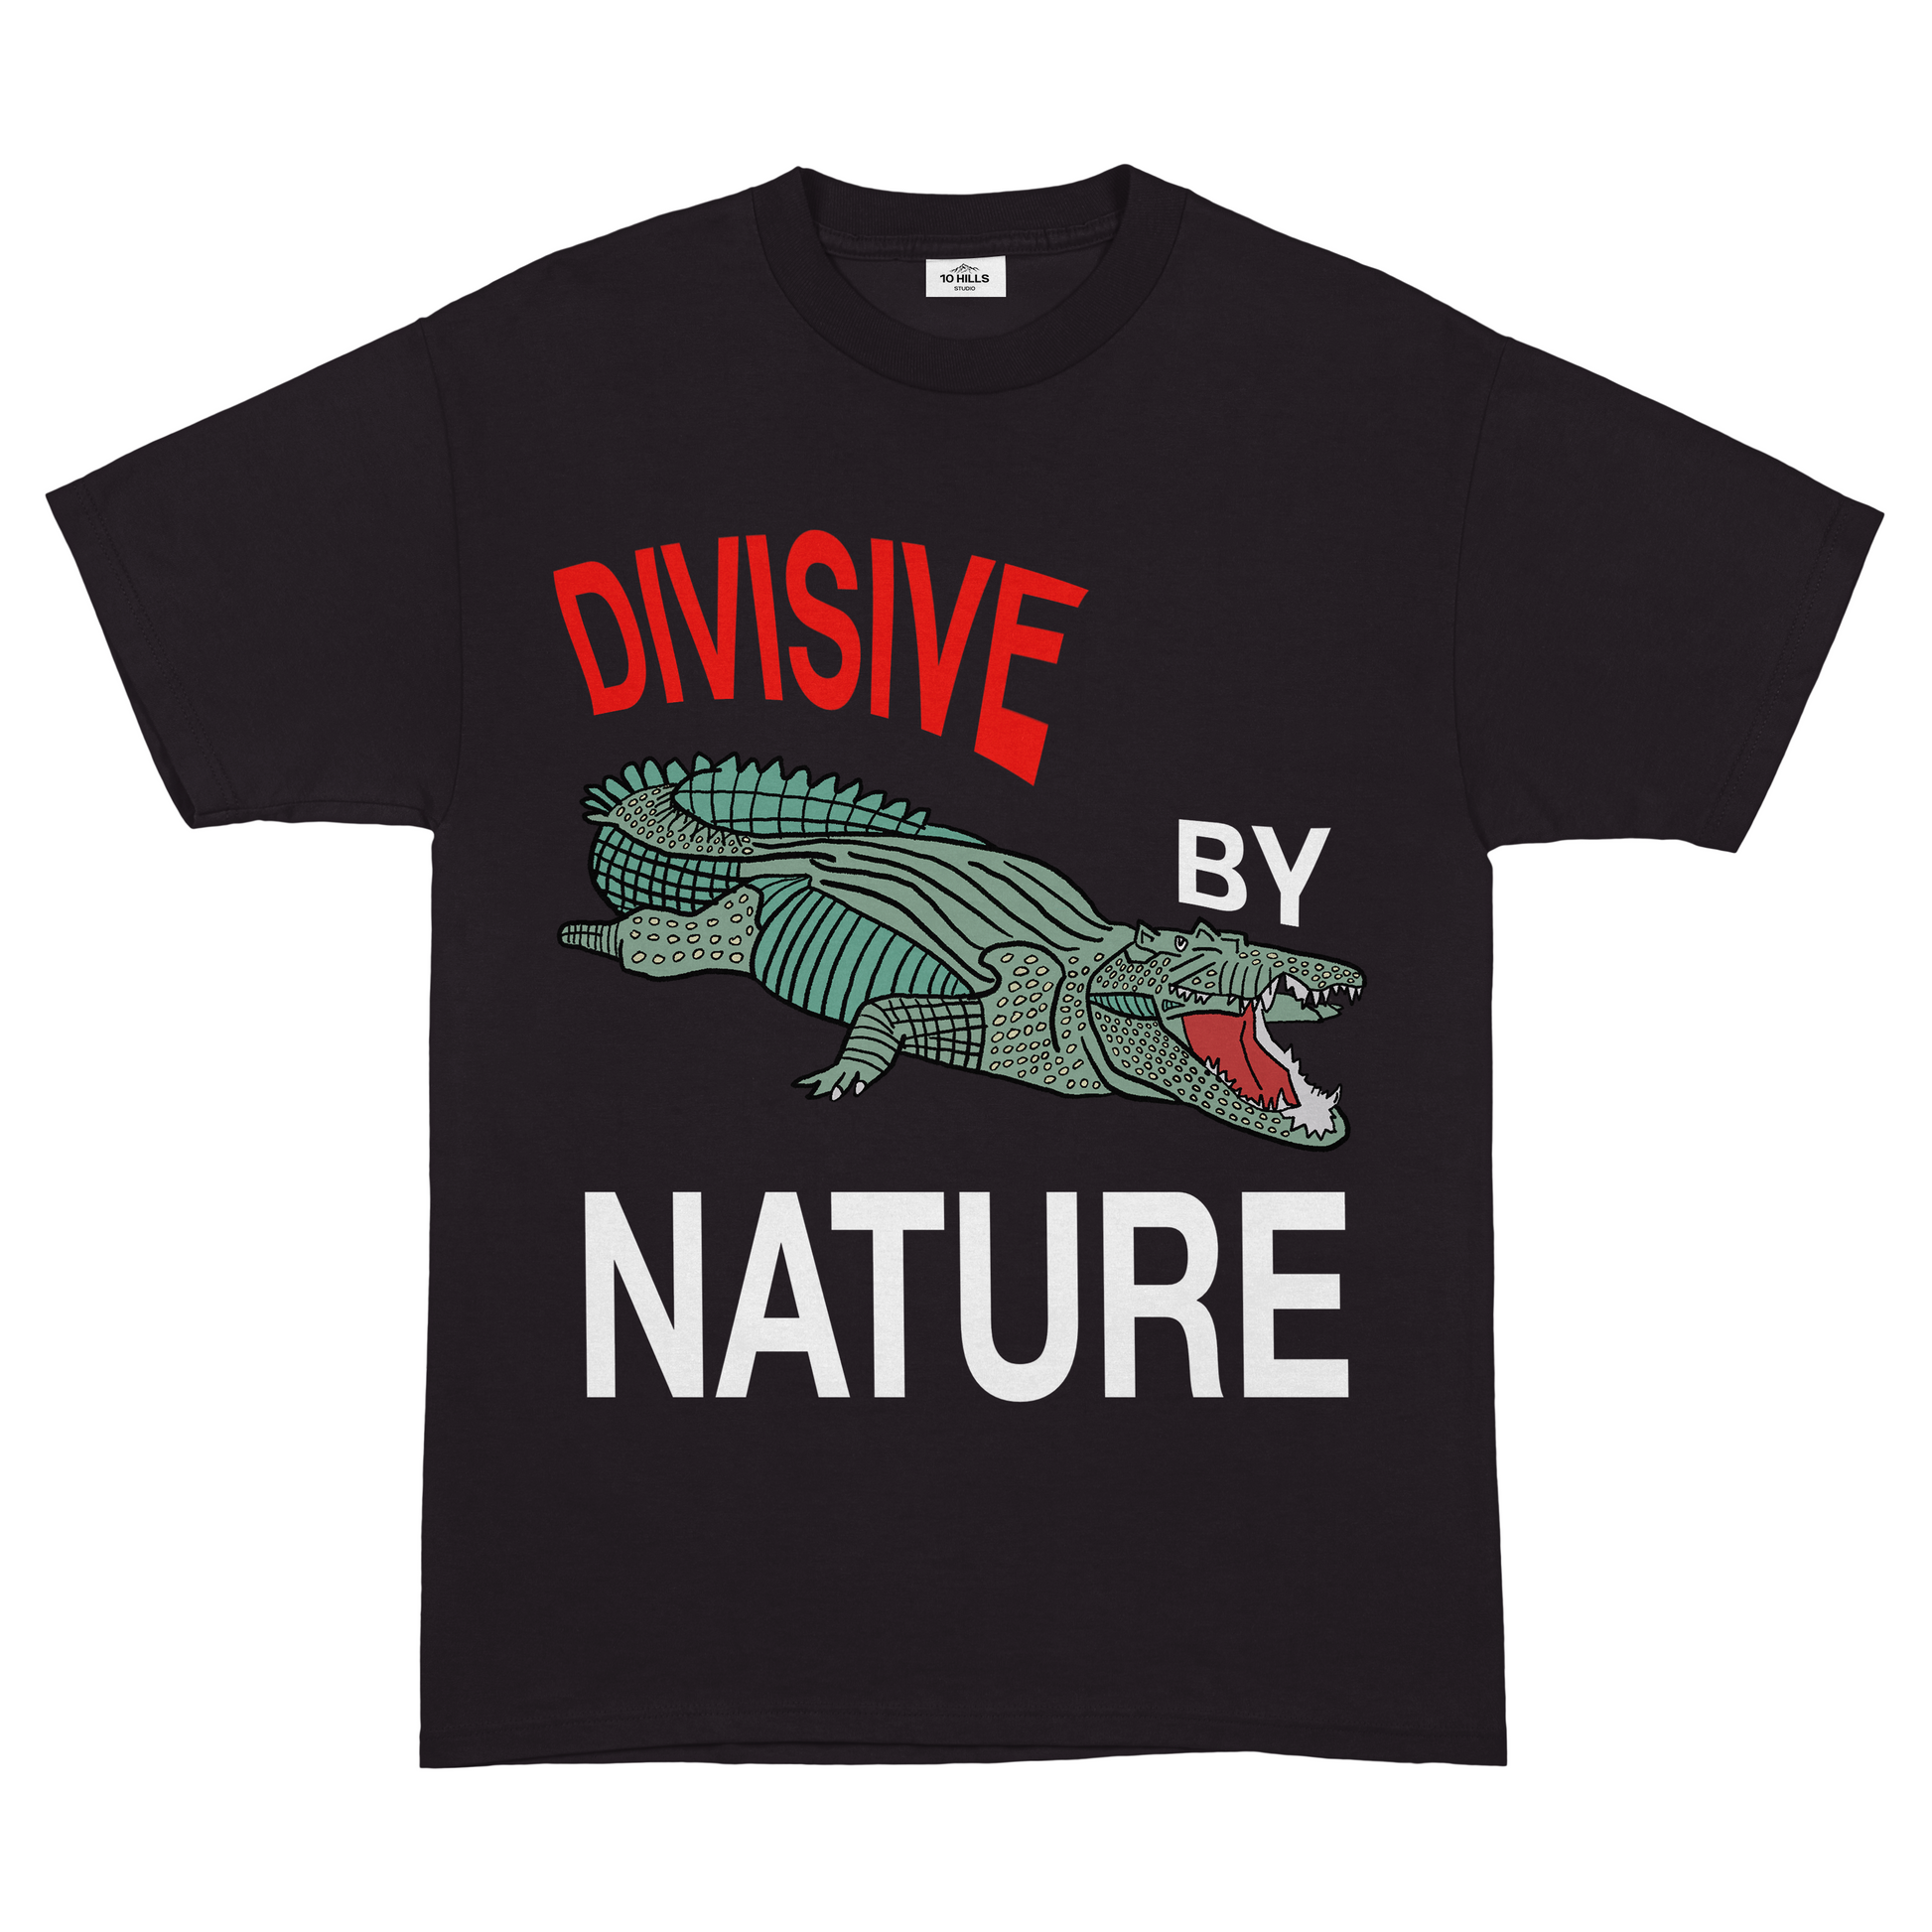 Front view of 10 Hills Studio Unisex 'Divisive By Nature' Black Boxy Tee